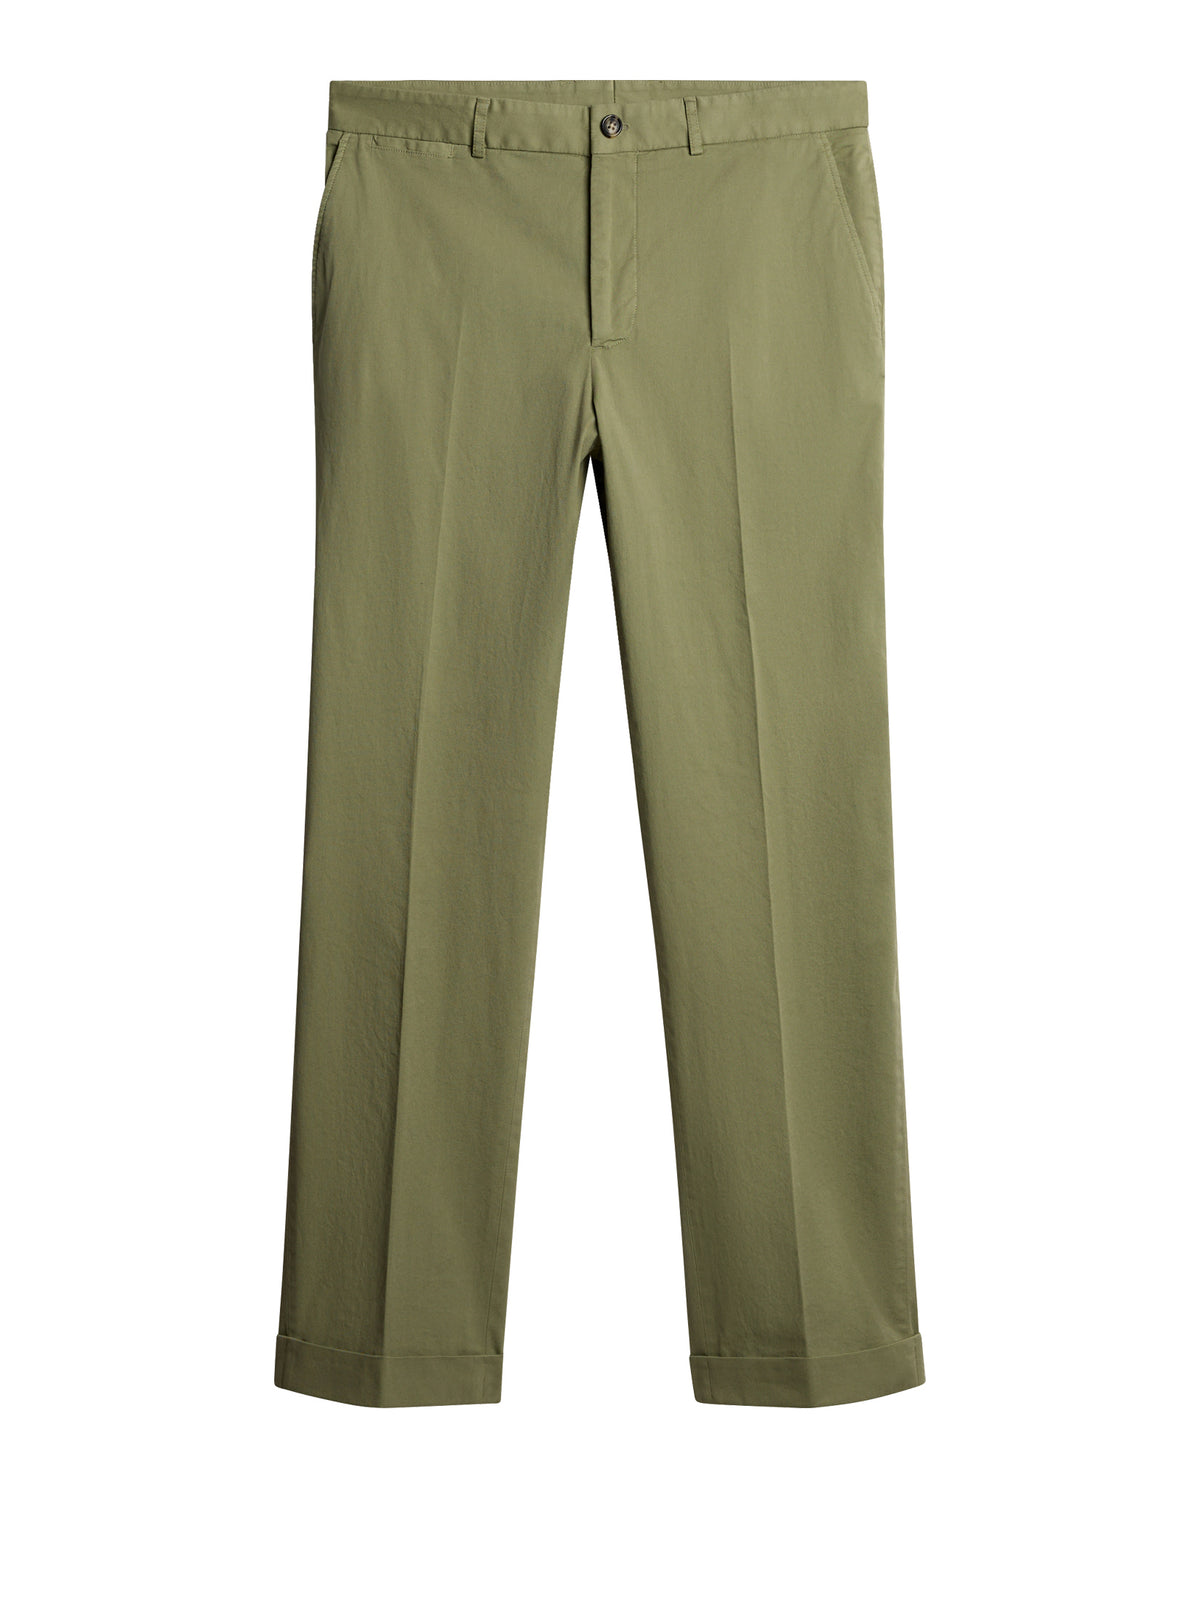 Lois GMT Dyed Pants / Oil Green – J.Lindeberg